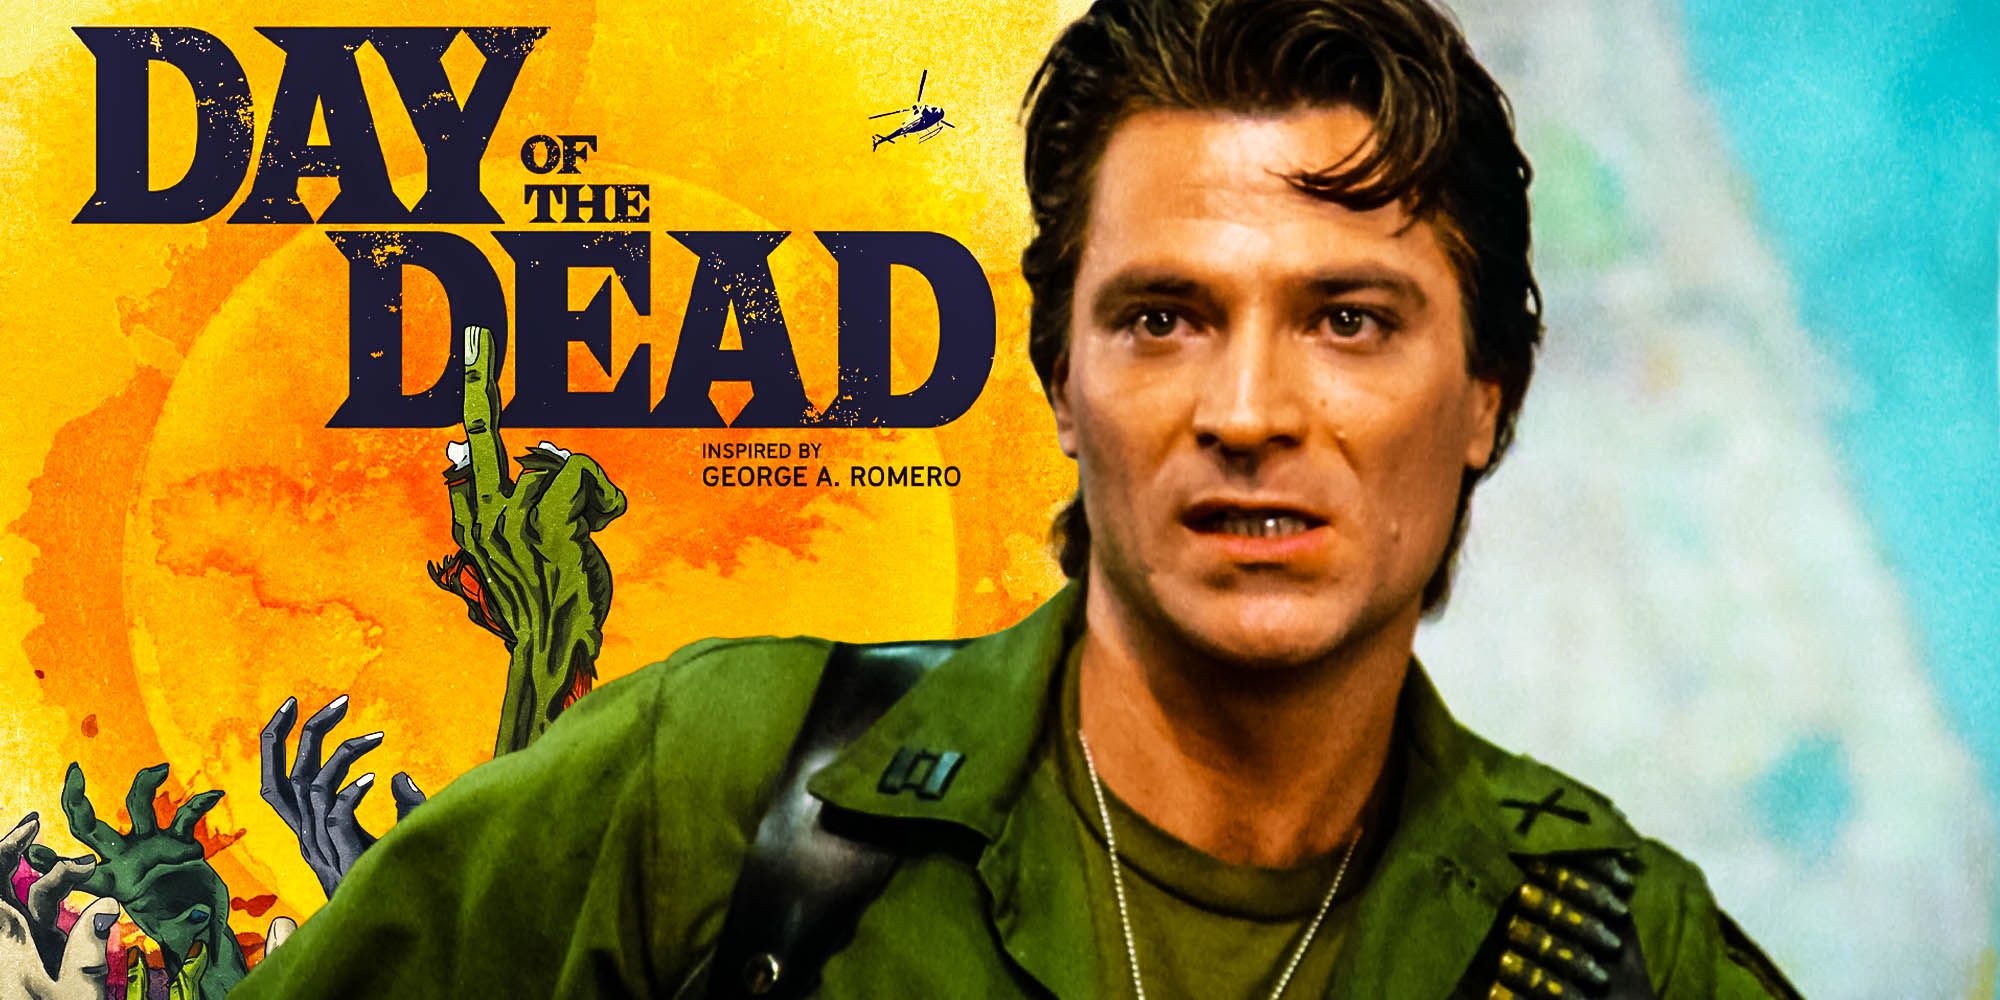 Day of the dead syfy series canon links to George R Romero film rhodes